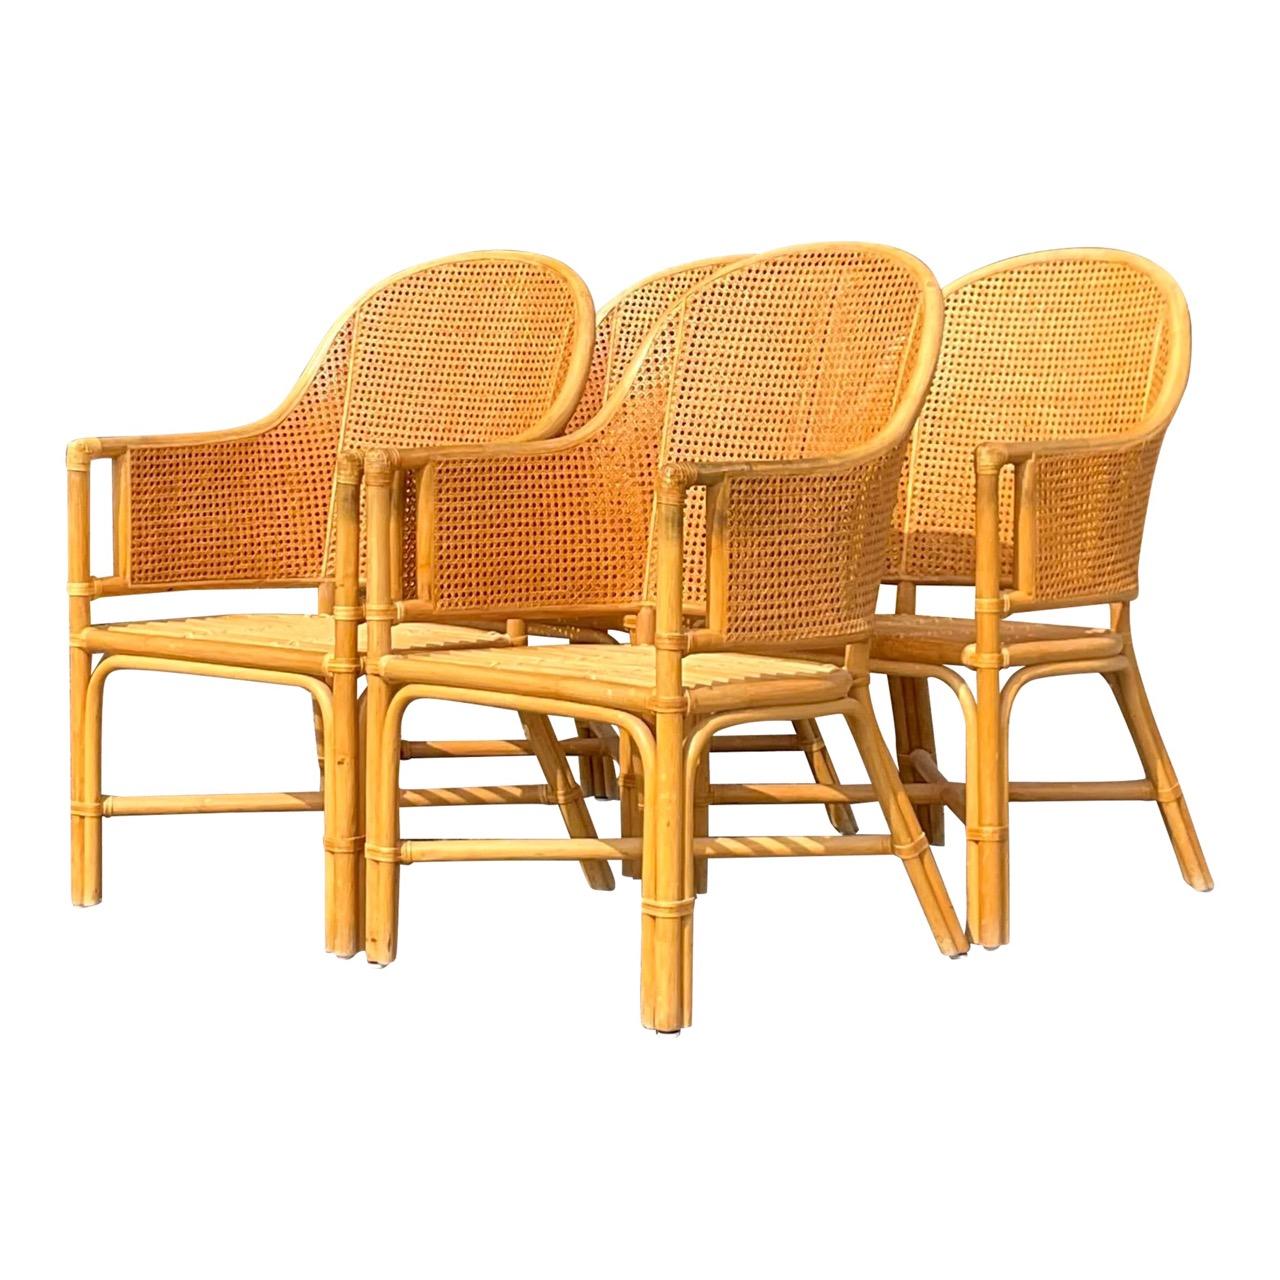 20th Century Vintage Coastal Cane Rattan Dining Chairs After McGuire - Set of 4 For Sale